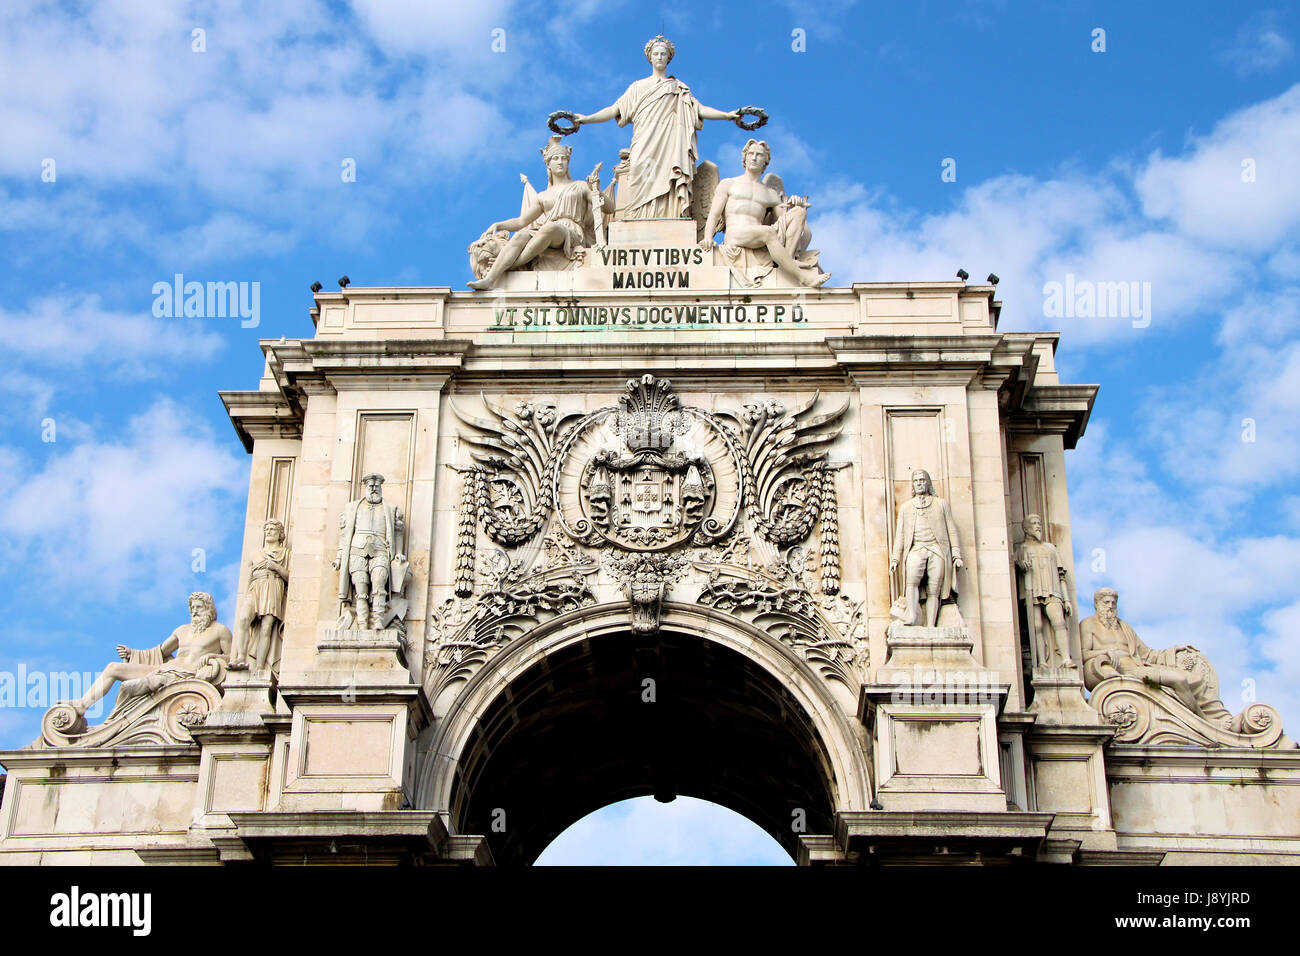 portugal, lisbon, triumphal arch, allegory, historical, statue, old town, Stock Photo